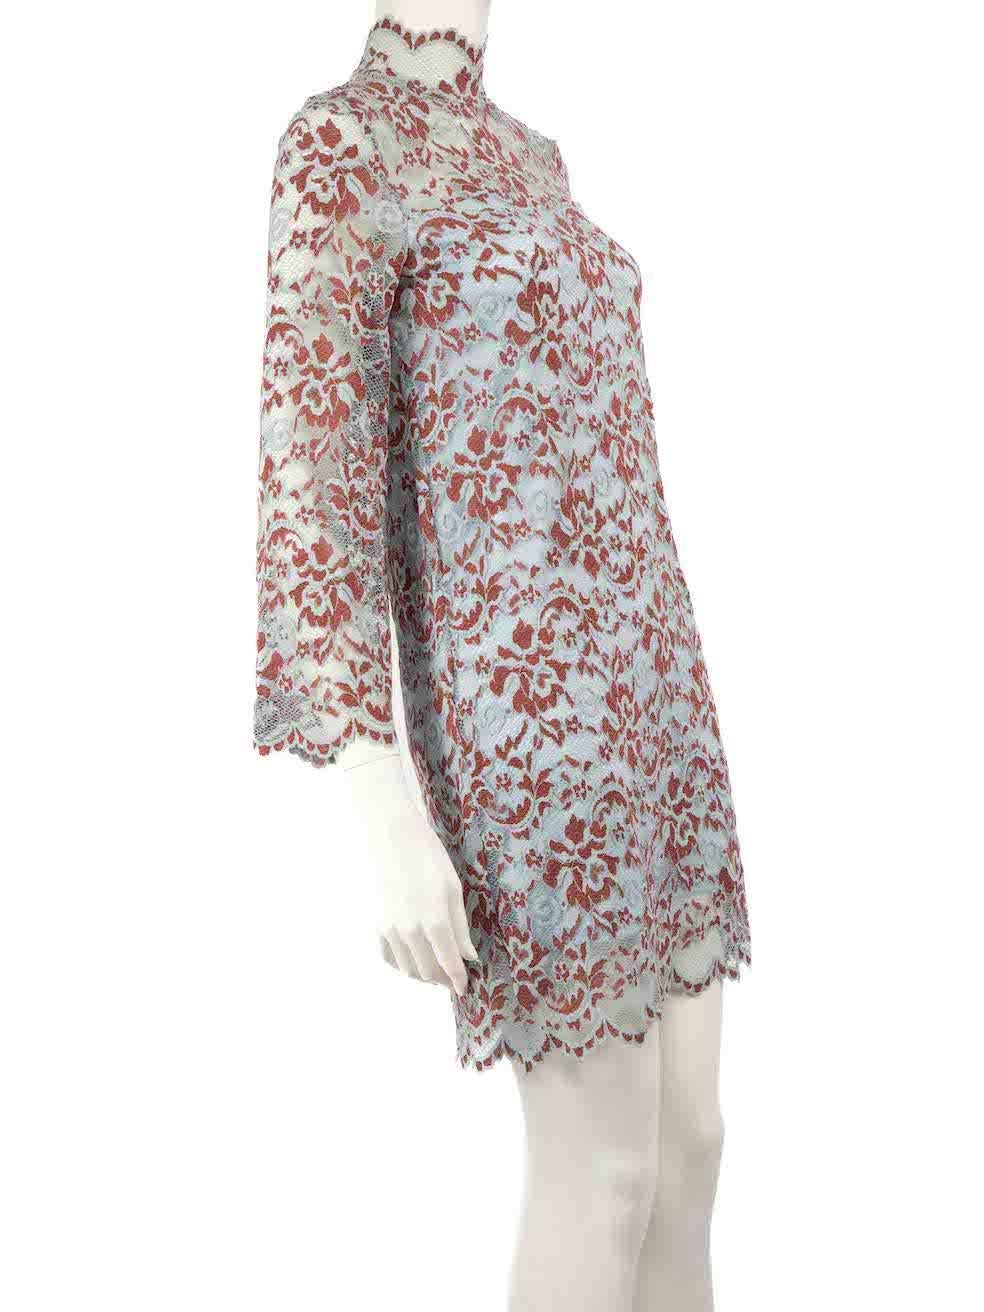 CONDITION is Very good. Hardly any visible wear to dress is evident on this used Ganni designer resale item.
 
 
 
 Details
 
 
 Multicolour- blue, brown
 
 Lace
 
 Dress
 
 Floral pattern
 
 See through long sleeves
 
 Mini
 
 Mock neck
 
 Back